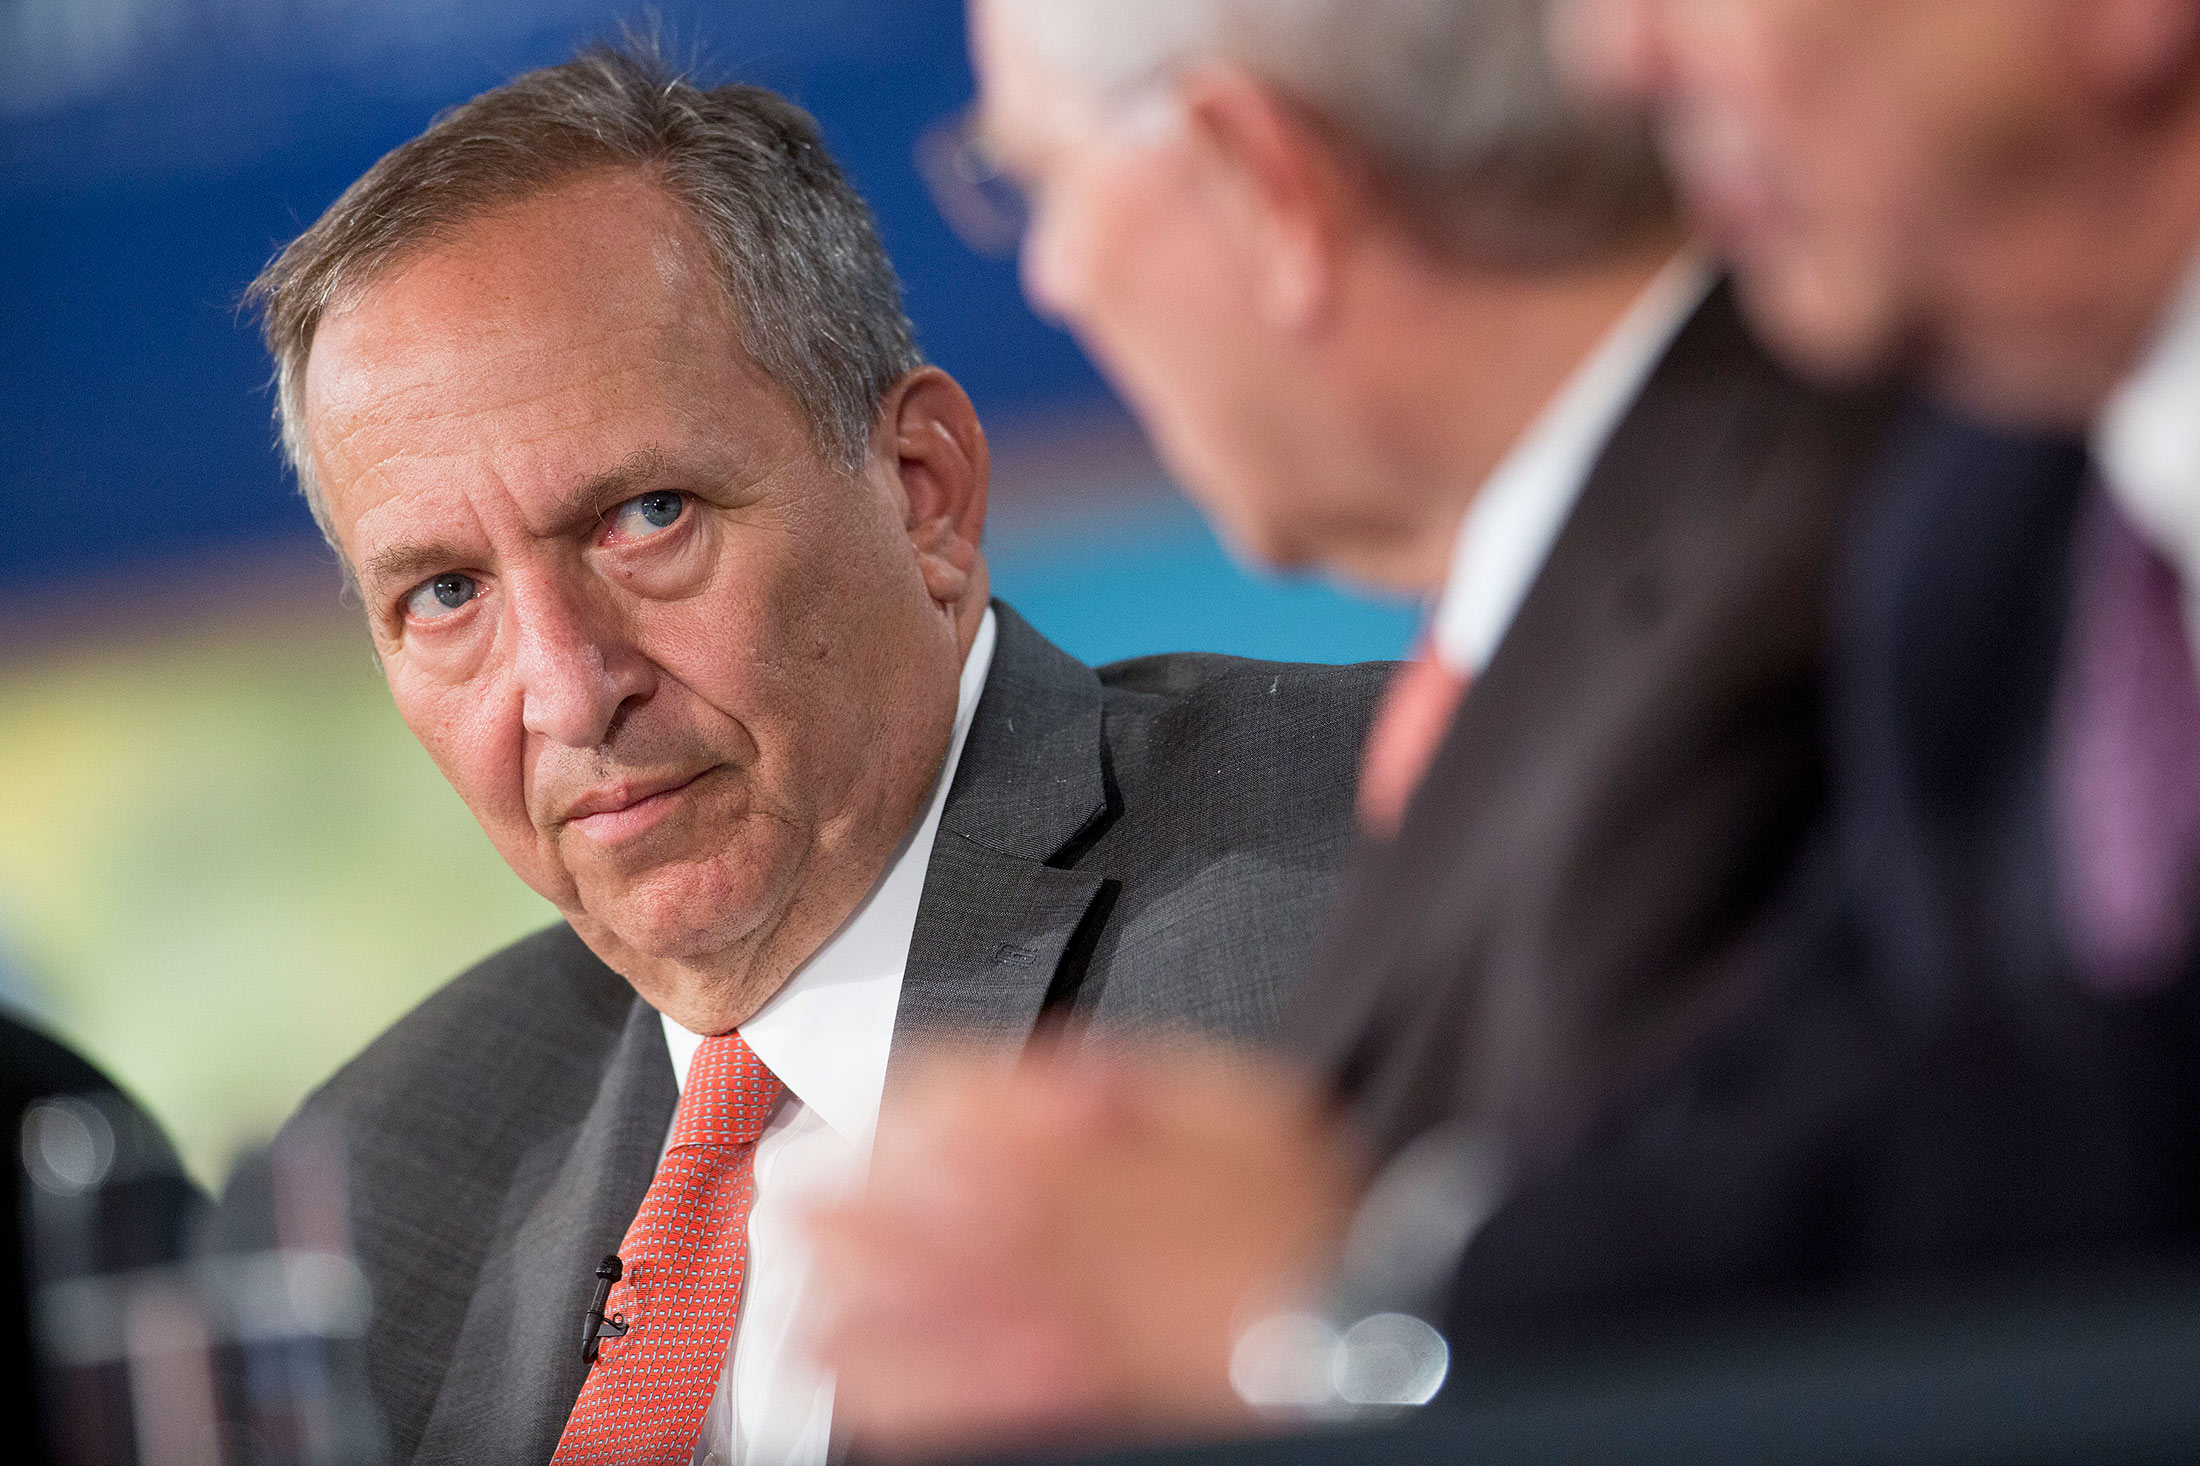 Larry Summers
